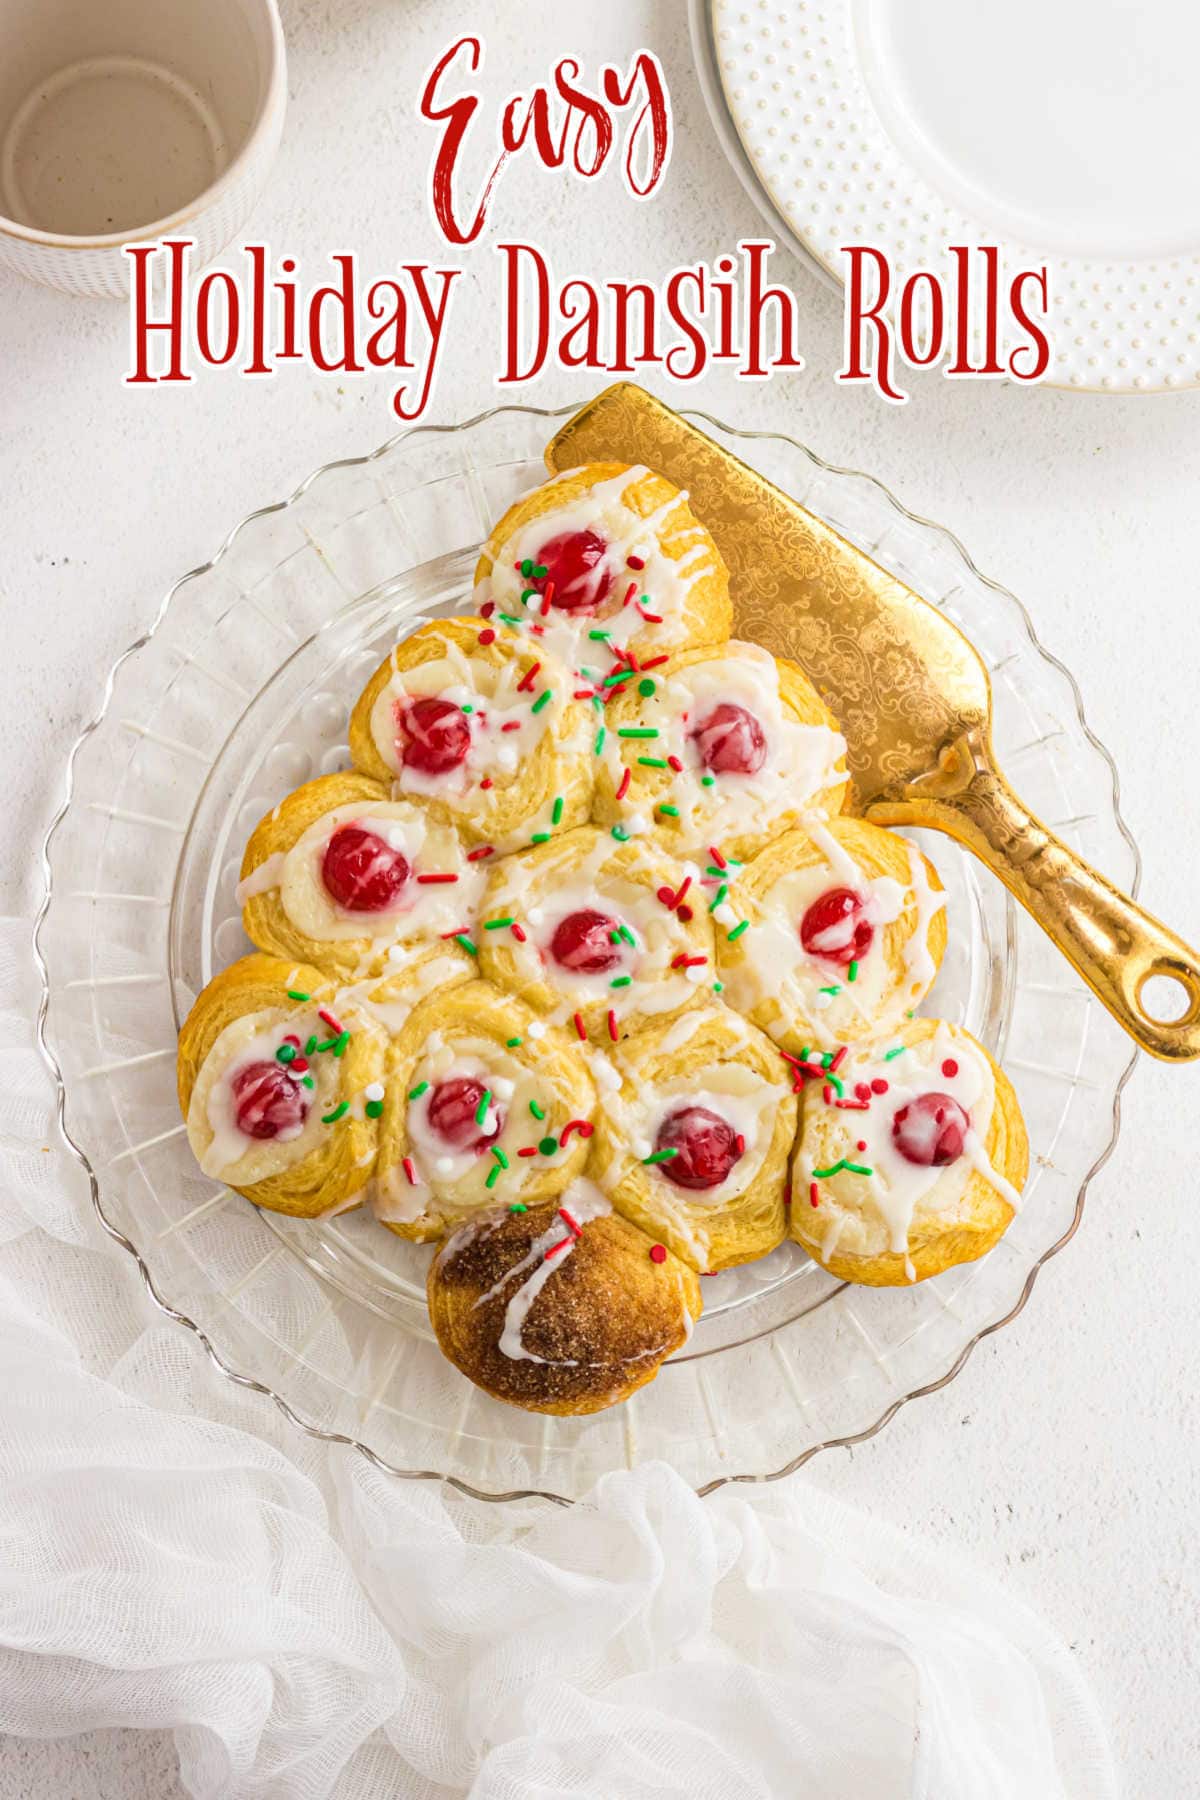 Title image. Overhead view of the sweet rolls formed into a Christmas tree shape.